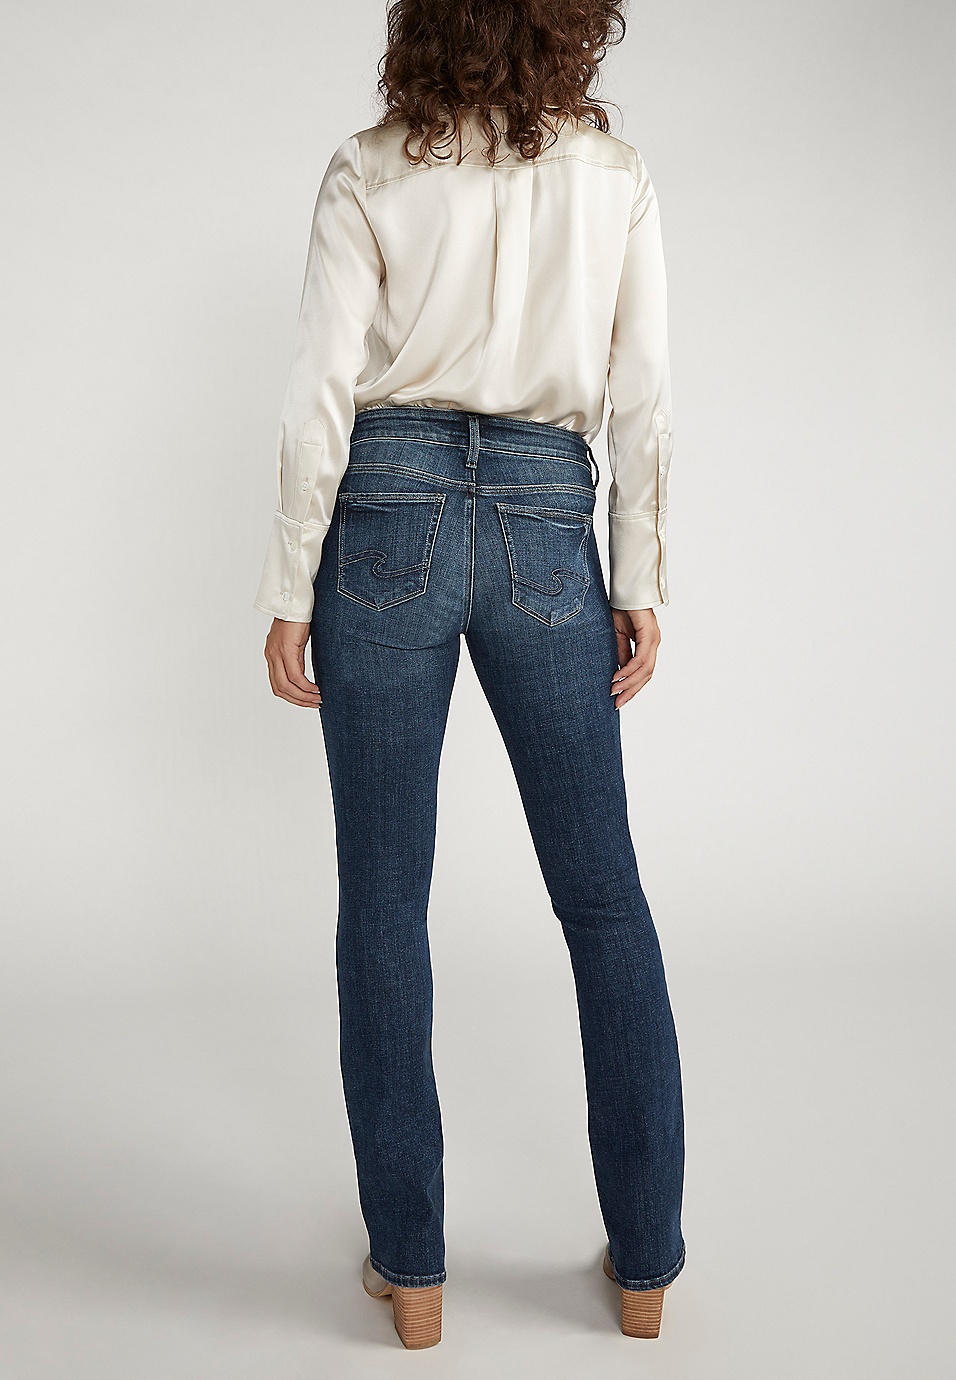 Buy Elyse Mid Rise Bootcut Jeans for USD 94.00